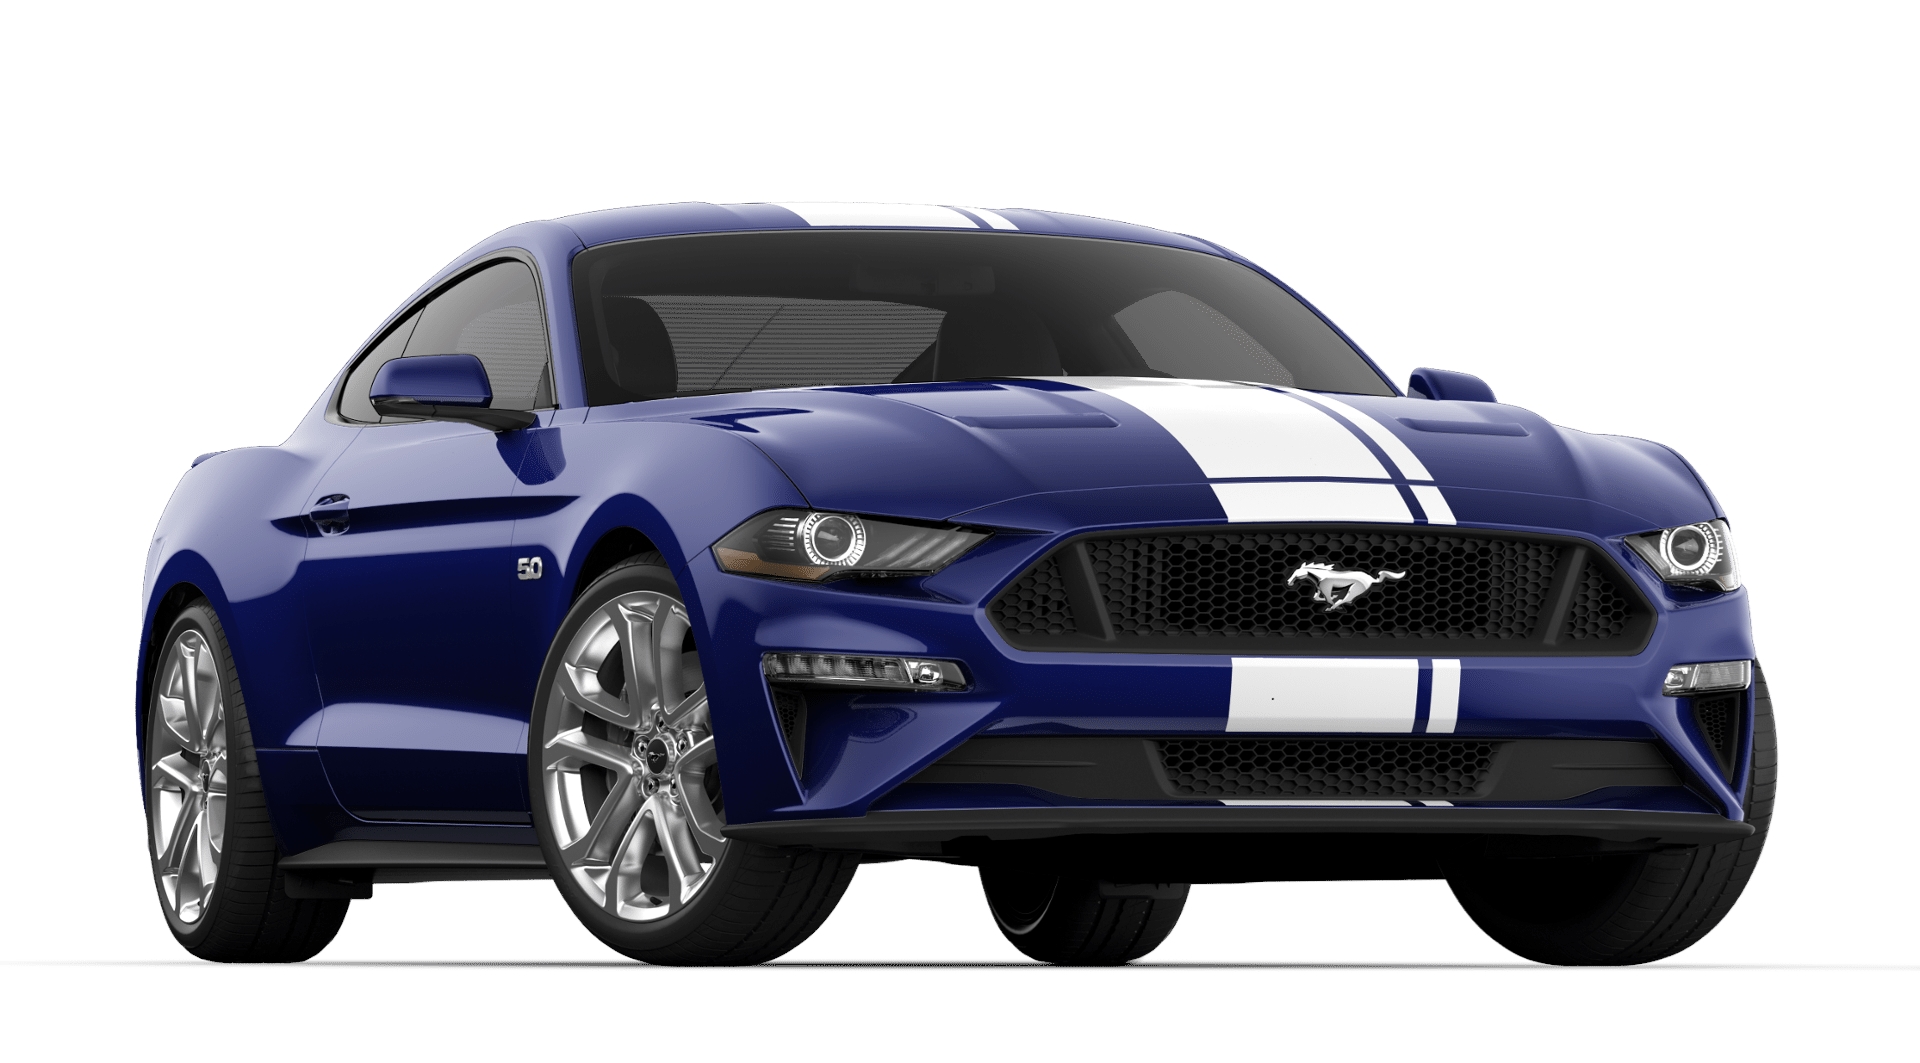 Ford Mustang Gt Convertible 2020 Cost
